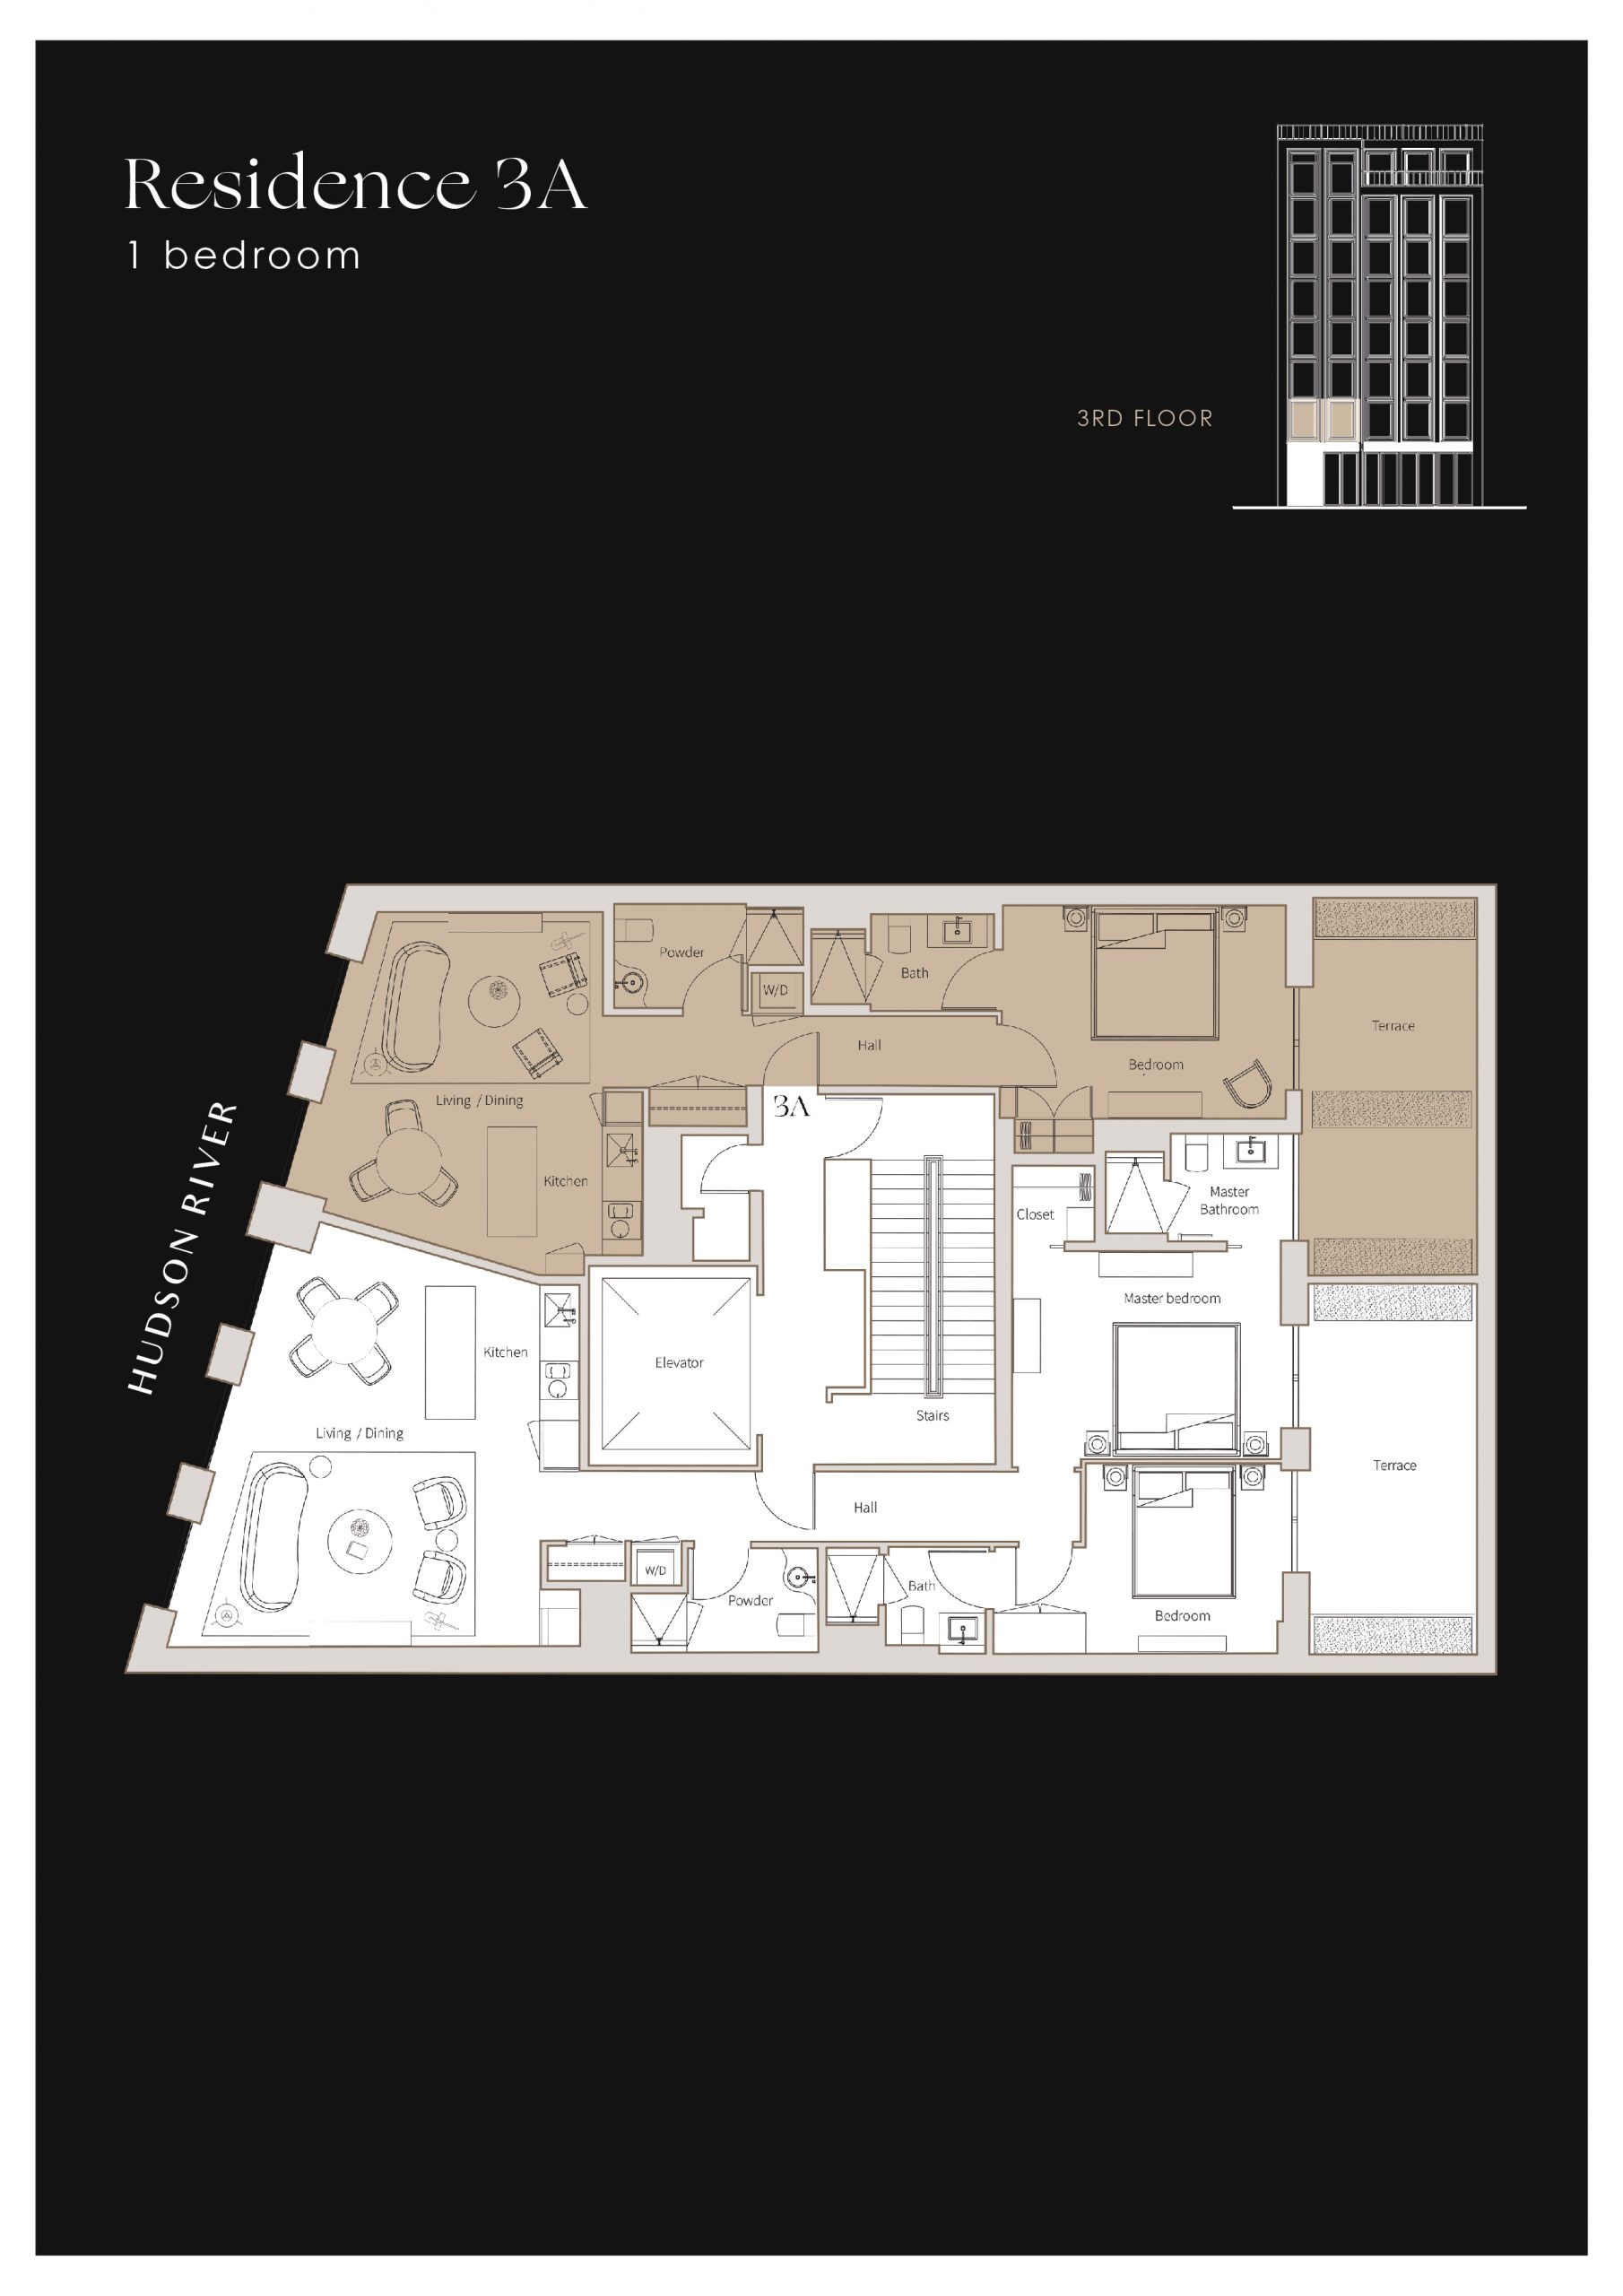 Plan of apartment Residence 3A